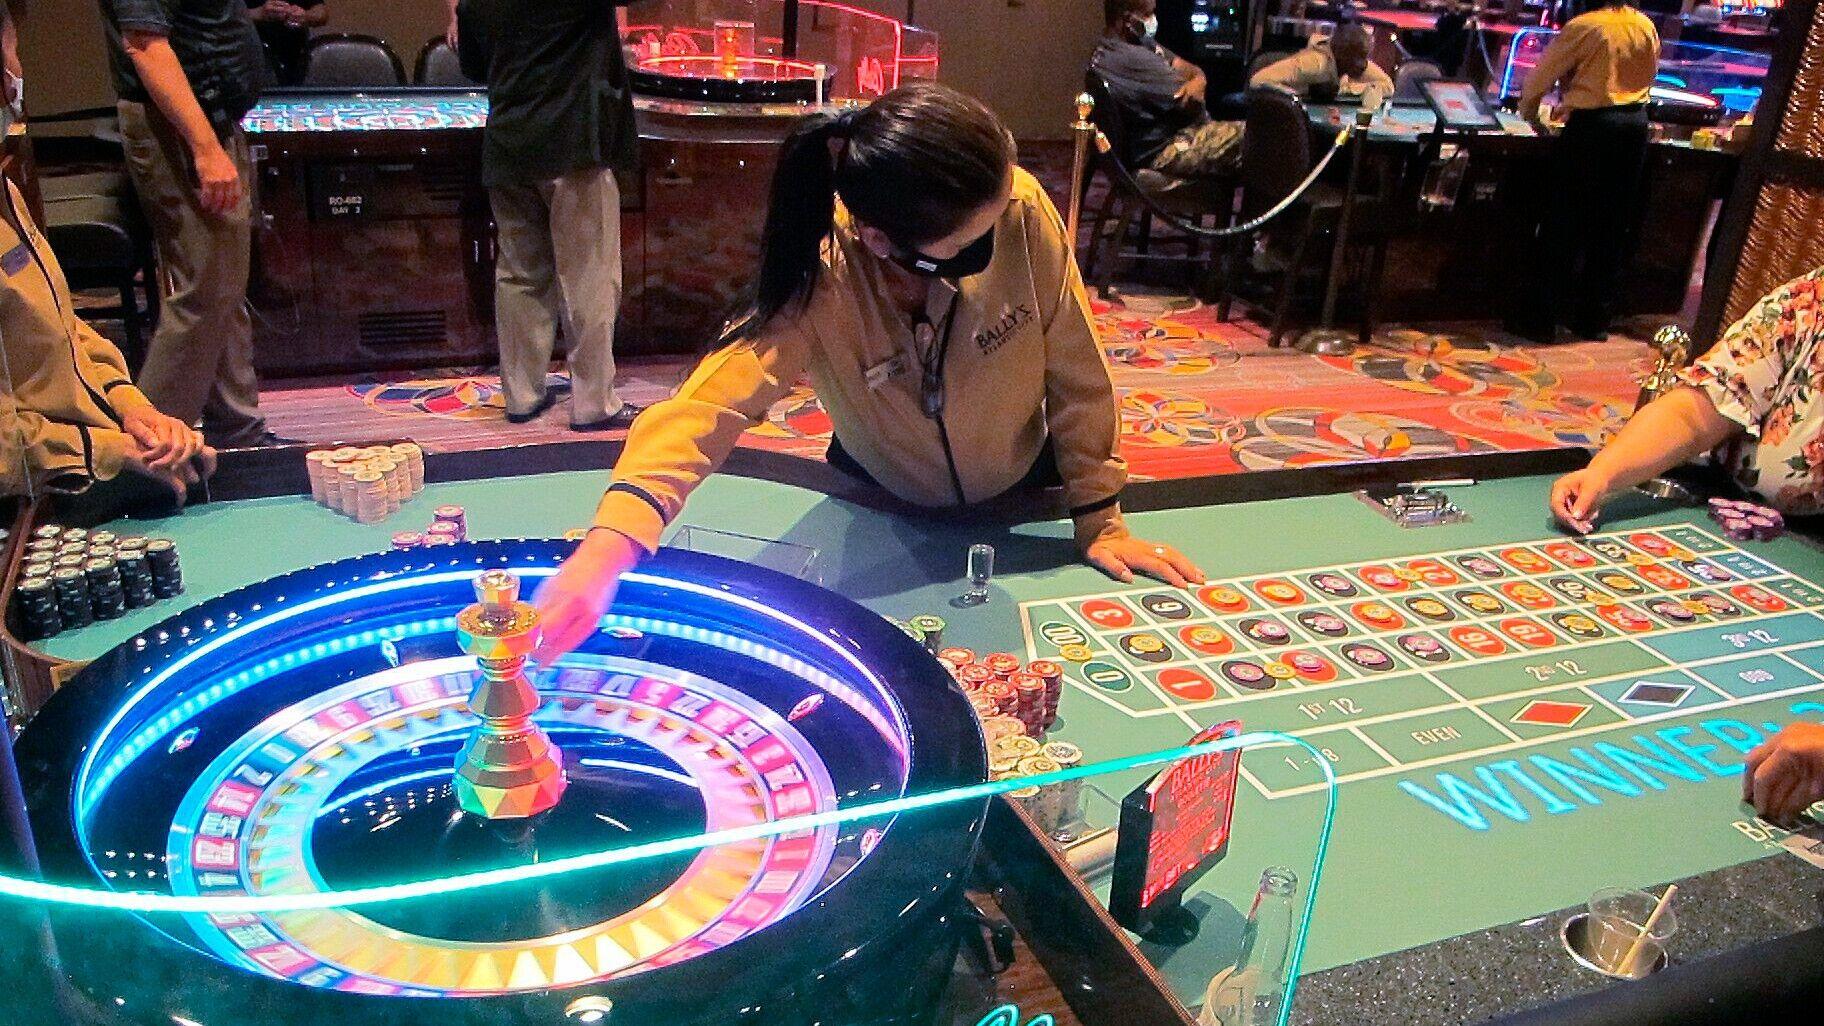 What do you call the casino employee who operates the roulette